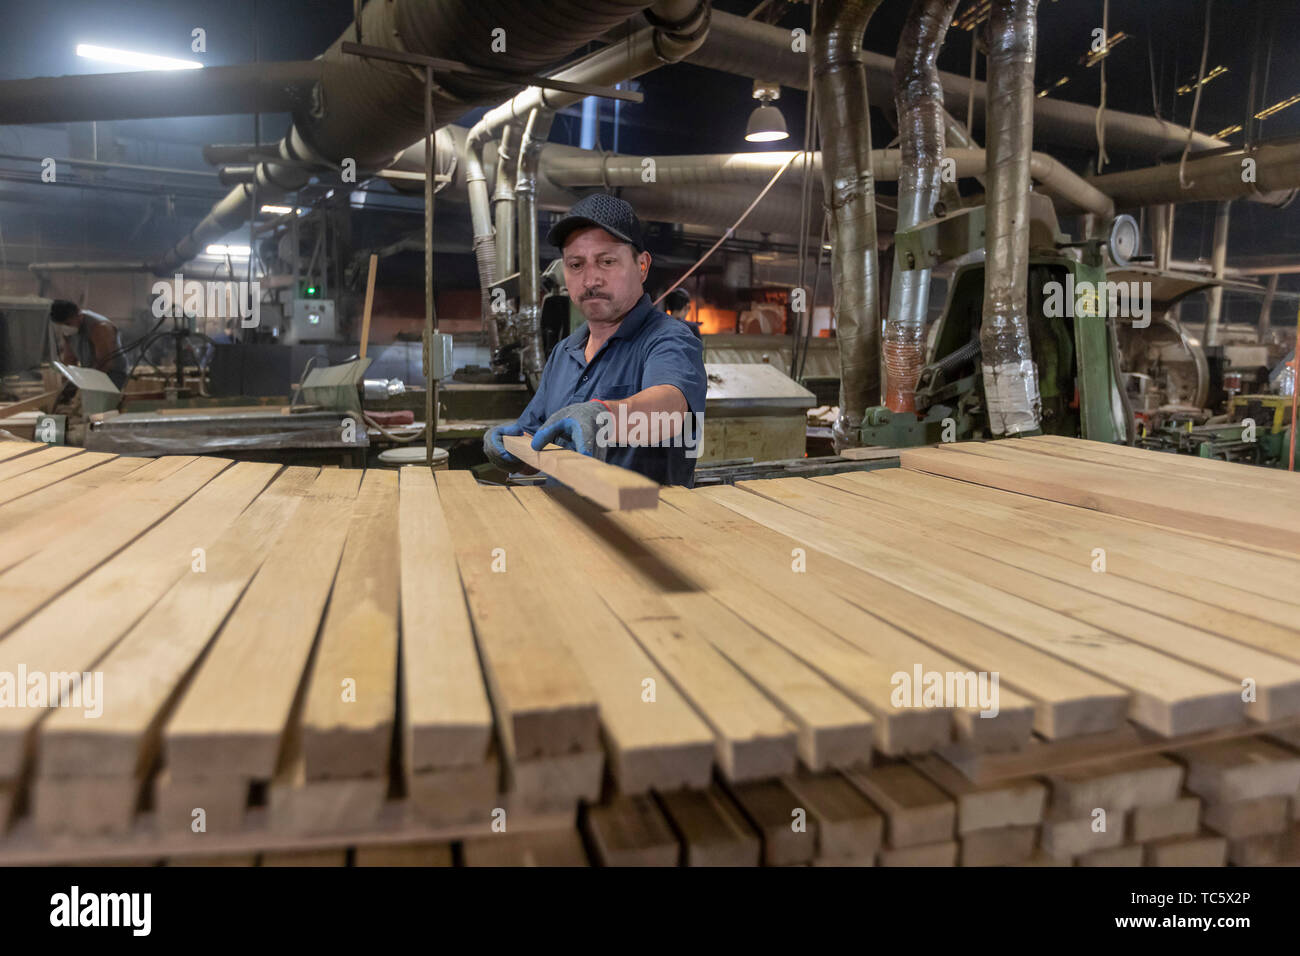 Louisville, Kentucky - Workers at Kelvin Cooperage make oak barrels for aging bourbon and wine. Stock Photo